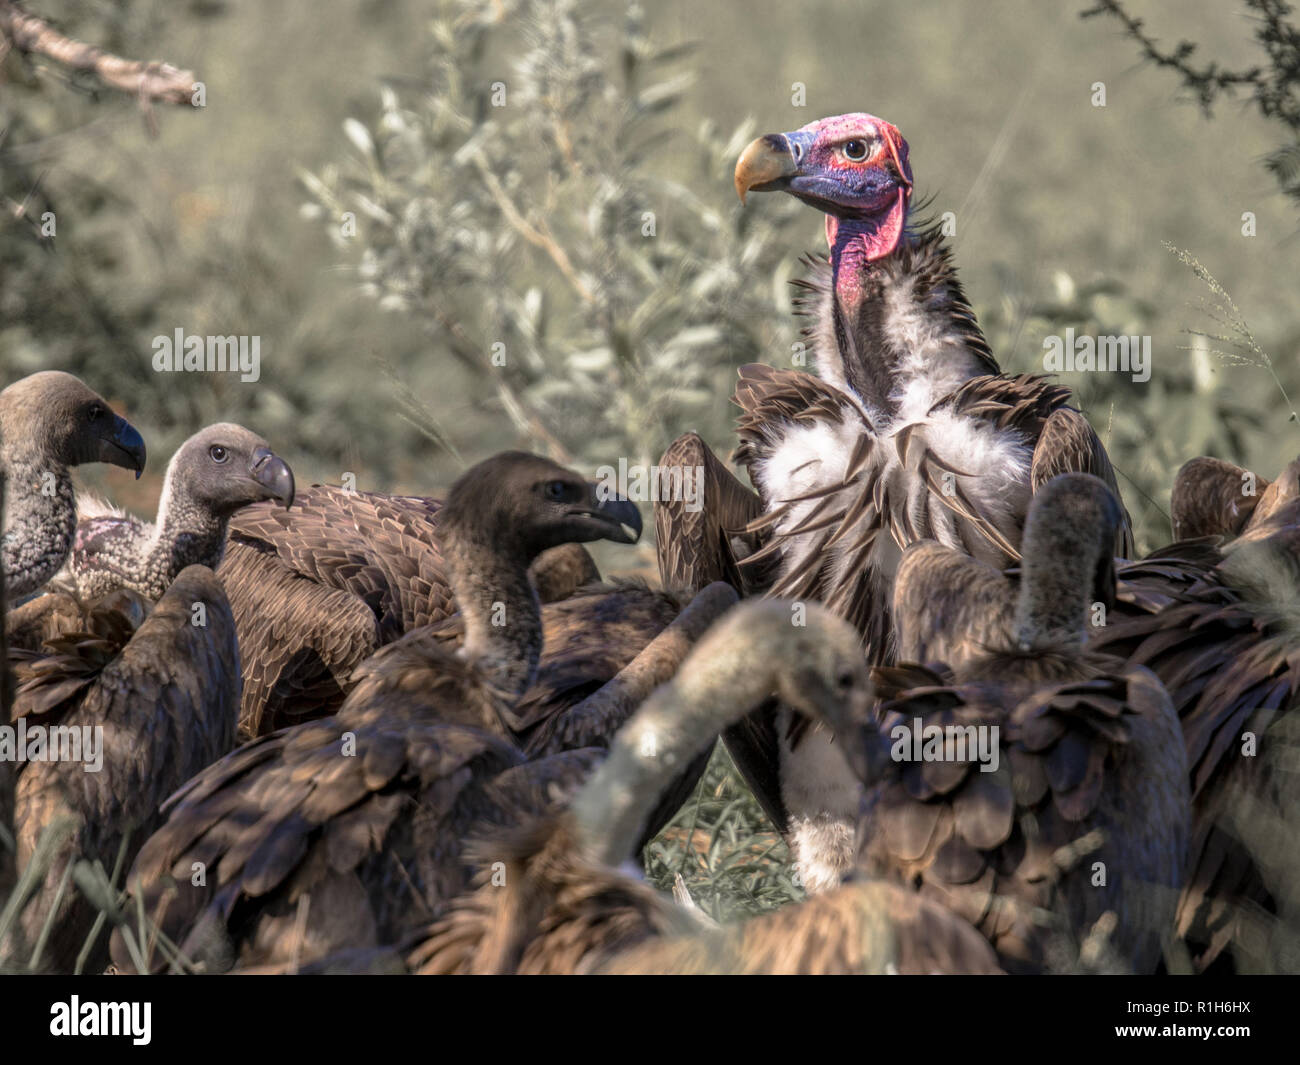 Lappet-faced vulture (Torgos tracheliotus) with pink head dominating White-backed vultures (Gyps africanus) at carcass in Kruger national park South A Stock Photo